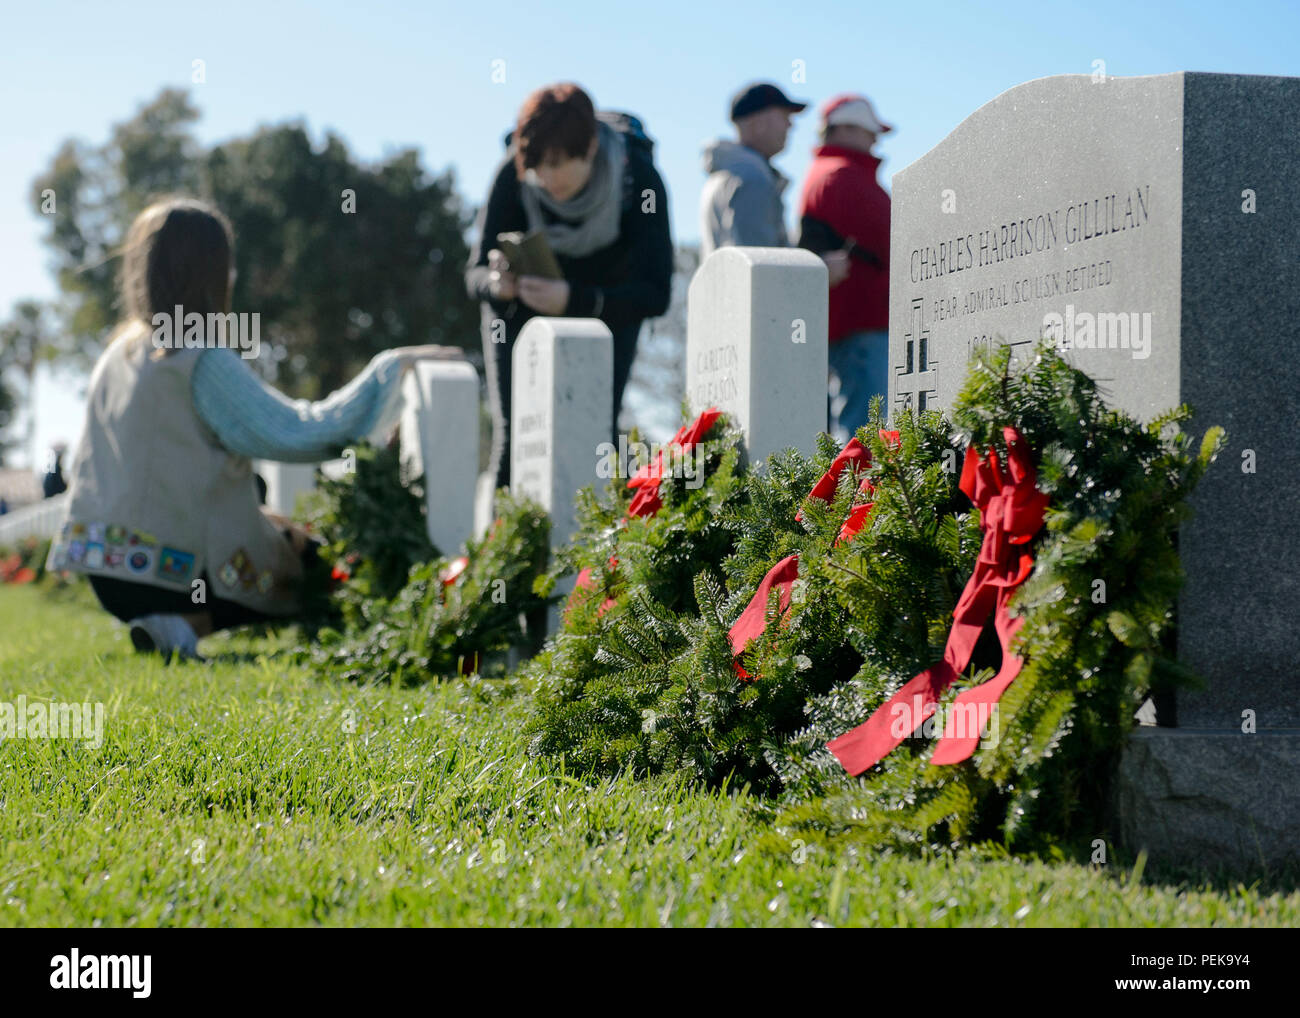 151212-N-QW941-188  SAN DIEGO (Dec. 12, 2015) Military service members, friends and family participate in a Wreaths Across America ceremony at Fort Rosecran’s National Cemetery. Wreaths Across America is an annual event that takes place in multiple locations where volunteers lay wreaths on tombstones of fallen military members. (U.S. Navy photo by Mass Communication Specialist 3rd Class Trevor Kohlrus/Released) Stock Photo